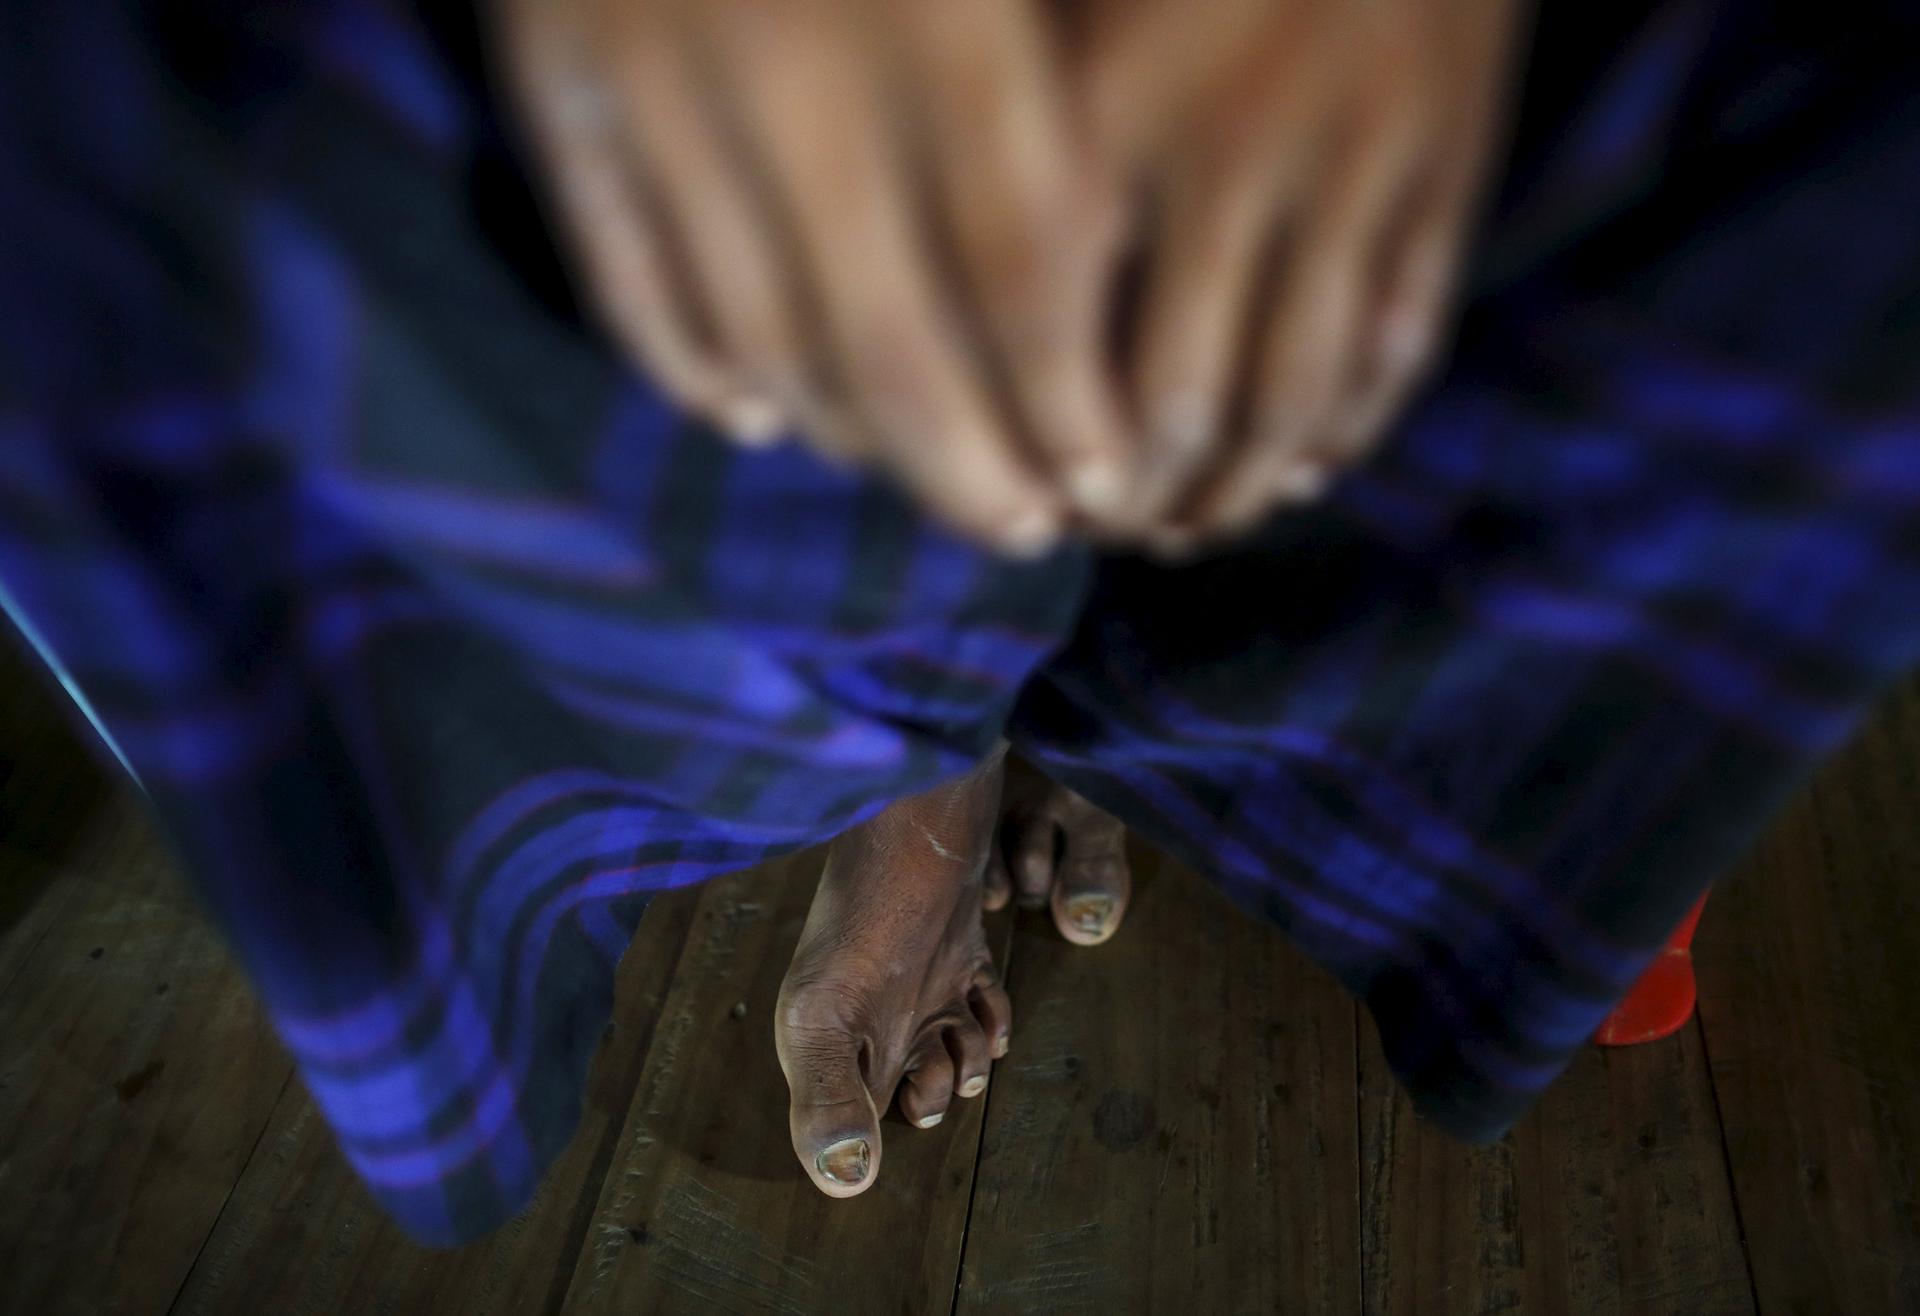 A victim of forced labour relates his story. Many care about their plight. Photo: Reuters